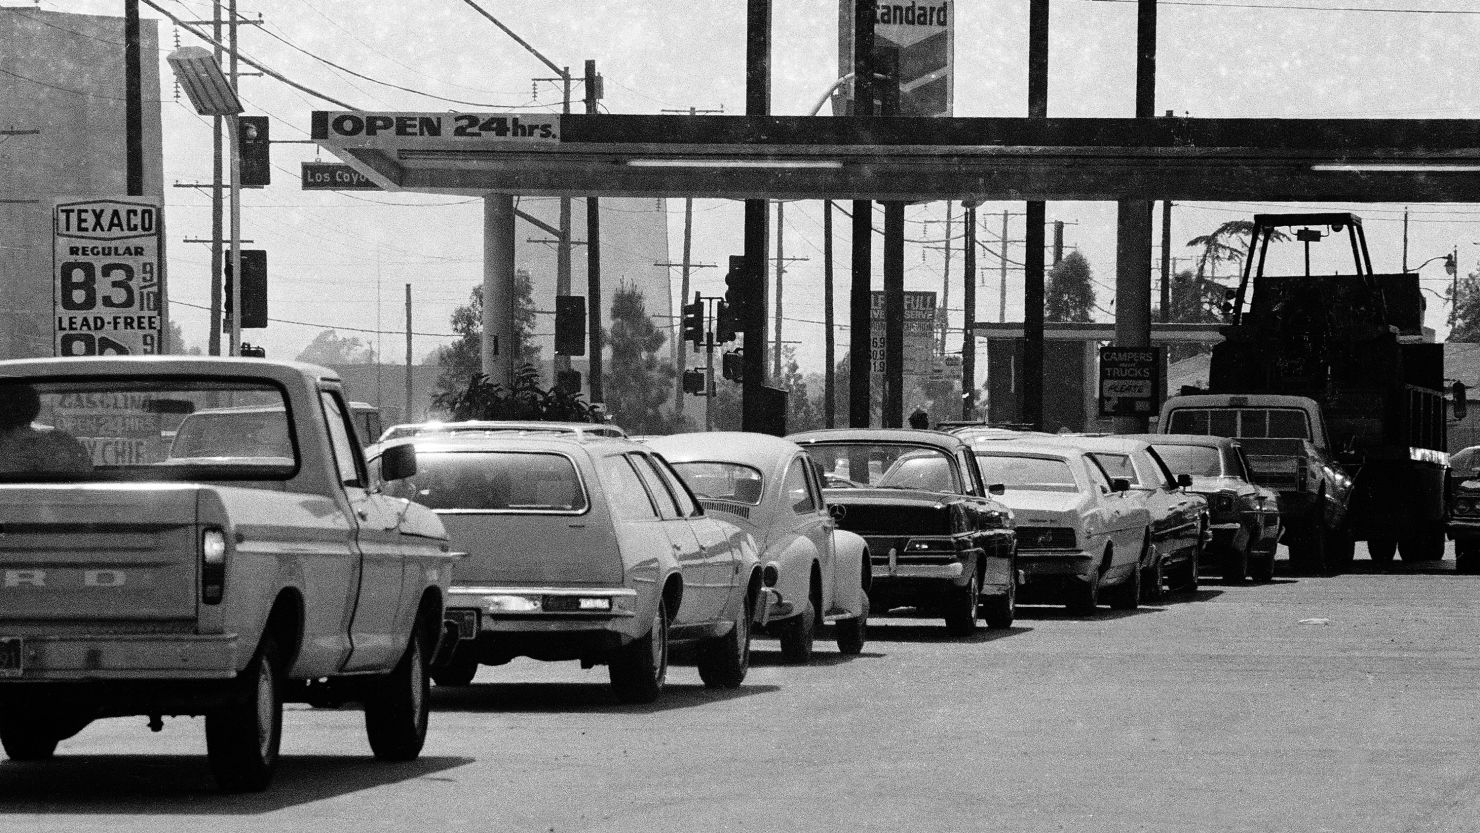 Vehicles line up for gasoline at a service station during gas shortages, May 3, 1979 in Long Beach, California.